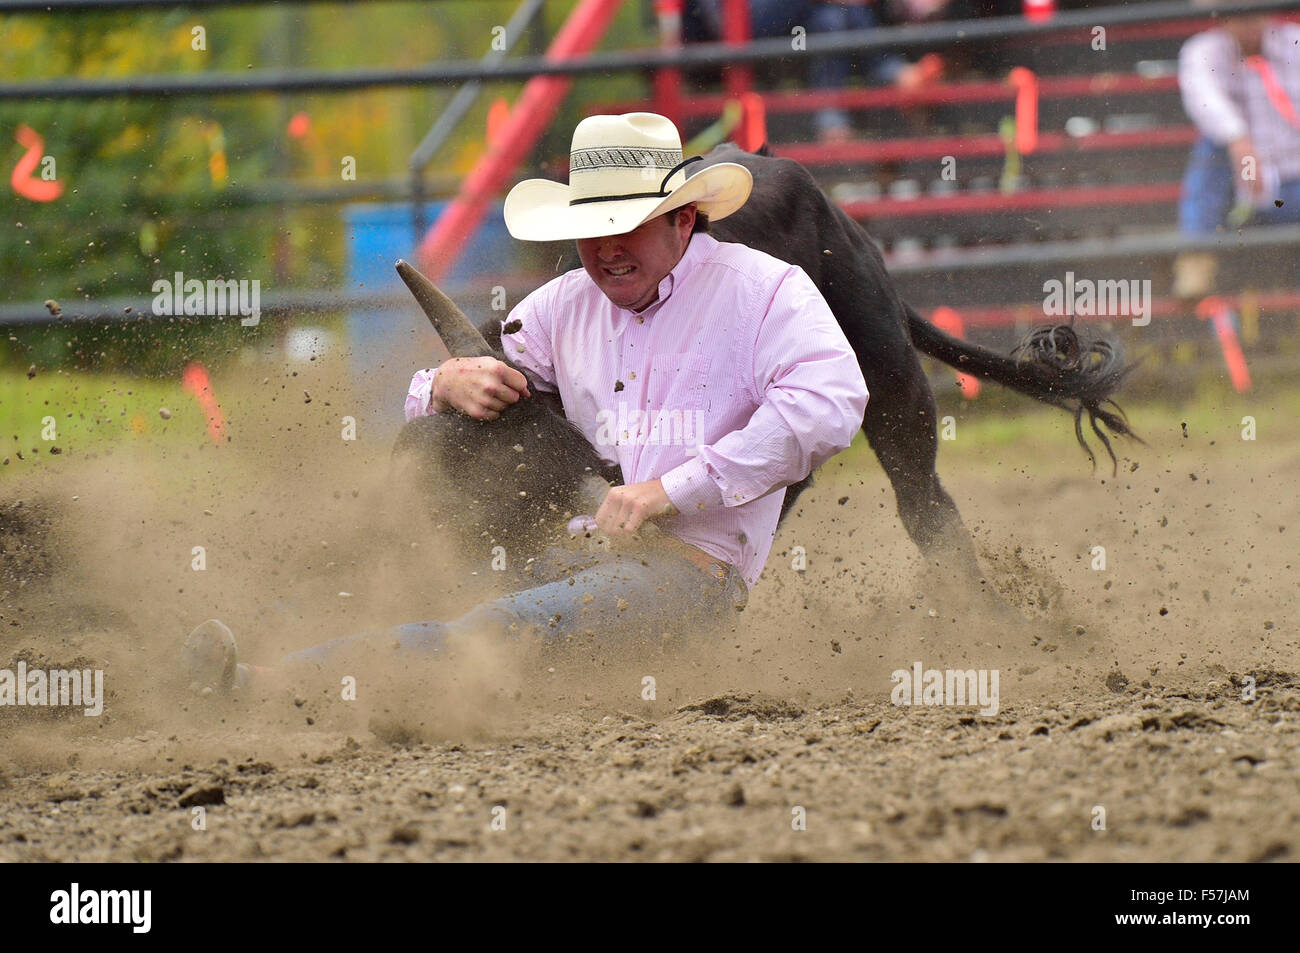 A cowboy trying to throw a steer at a rodeo competition in western Alberta Canada. Stock Photo